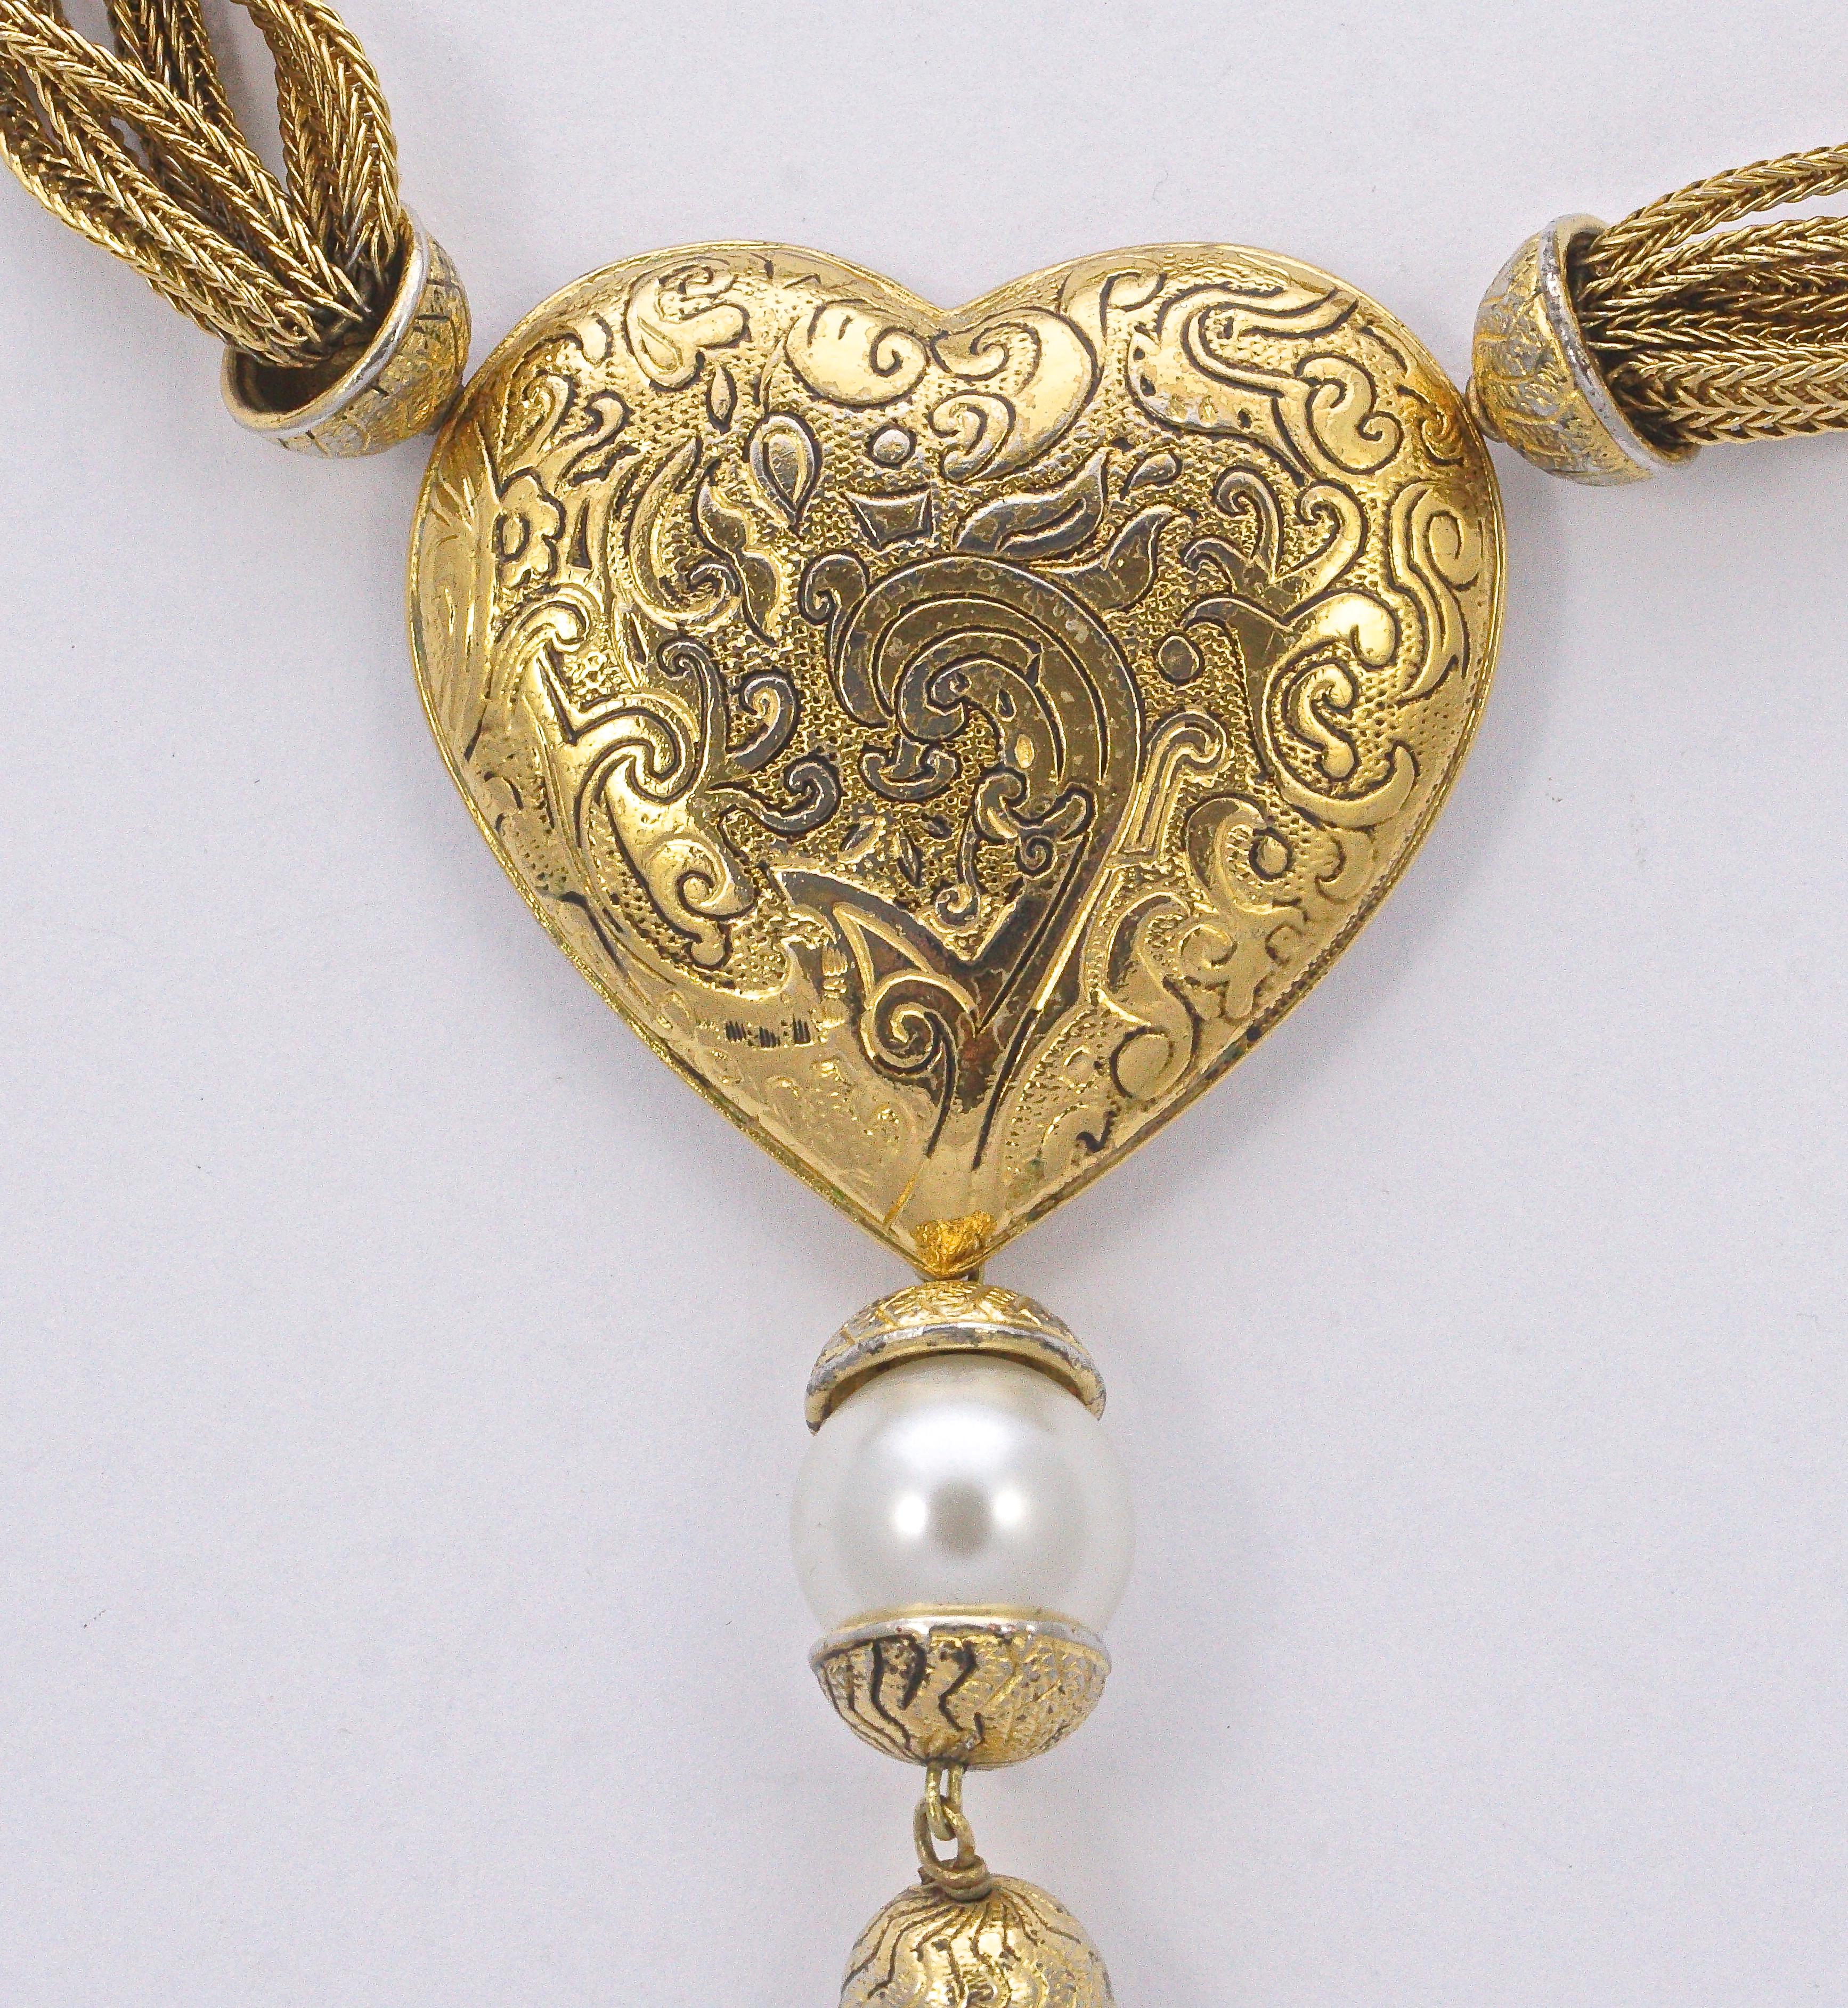 Beautiful Yves Saint Laurent gold plated multi strand and pearl necklace, featuring a large swirl design heart with pearl and tassel detail, circa 1980s. The necklace is length 60cm / 23.6 inches with the adjustable toggle clasp at its maximum, and